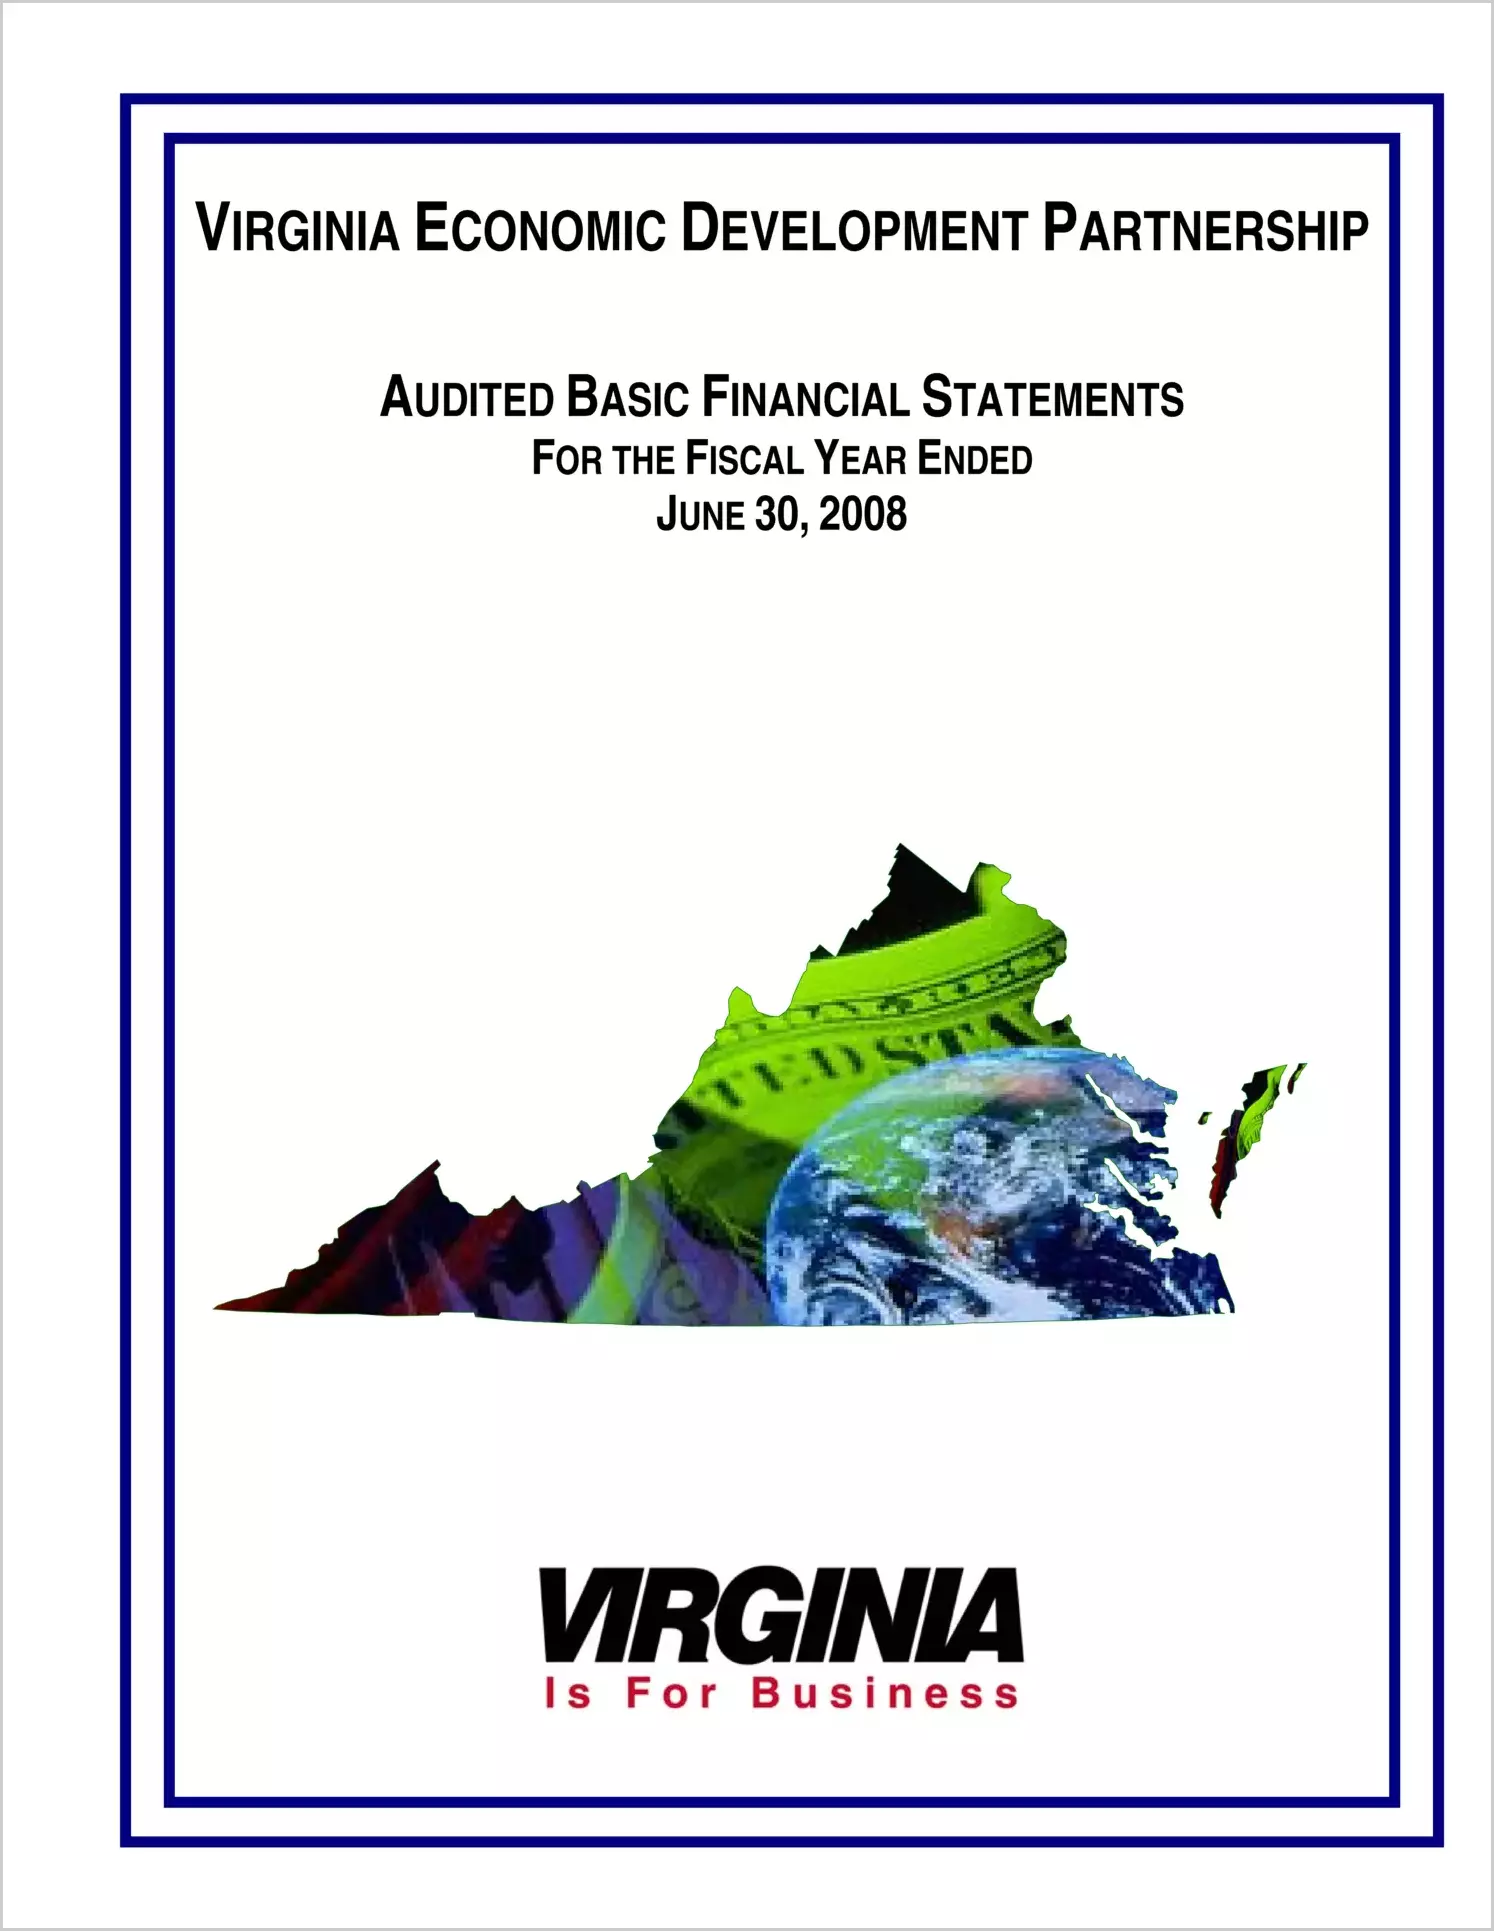 Virginia Economic Development Partnership Audited Basic Financial Statements for the fiscal year ended June 30, 2008